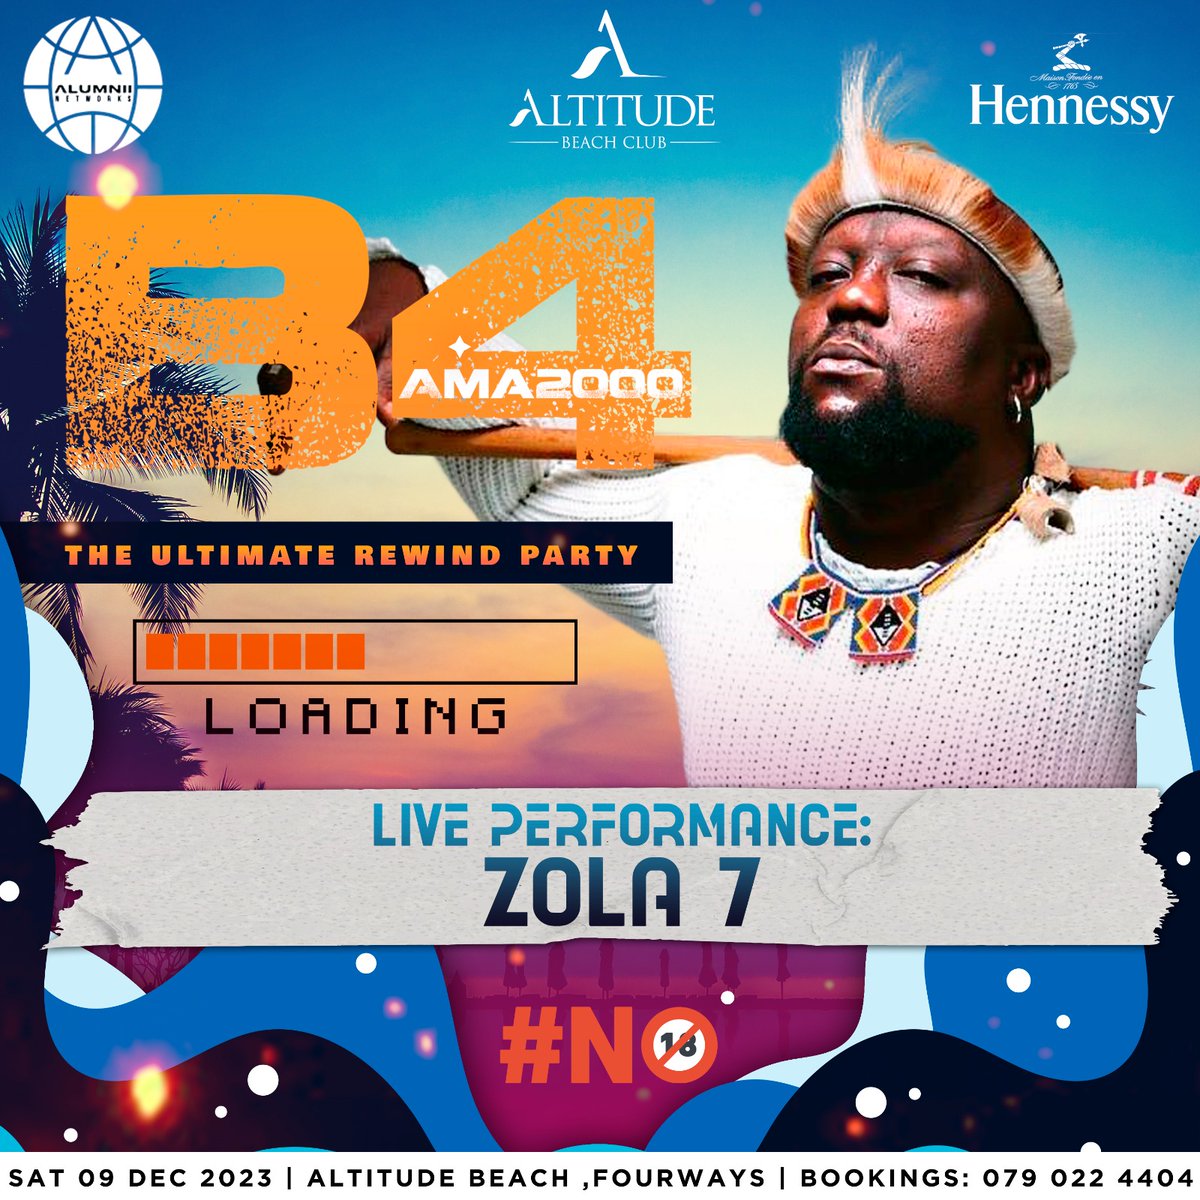 Let's Show Ama2000 how we rock this weekend @altitudebeach #NAMANJE